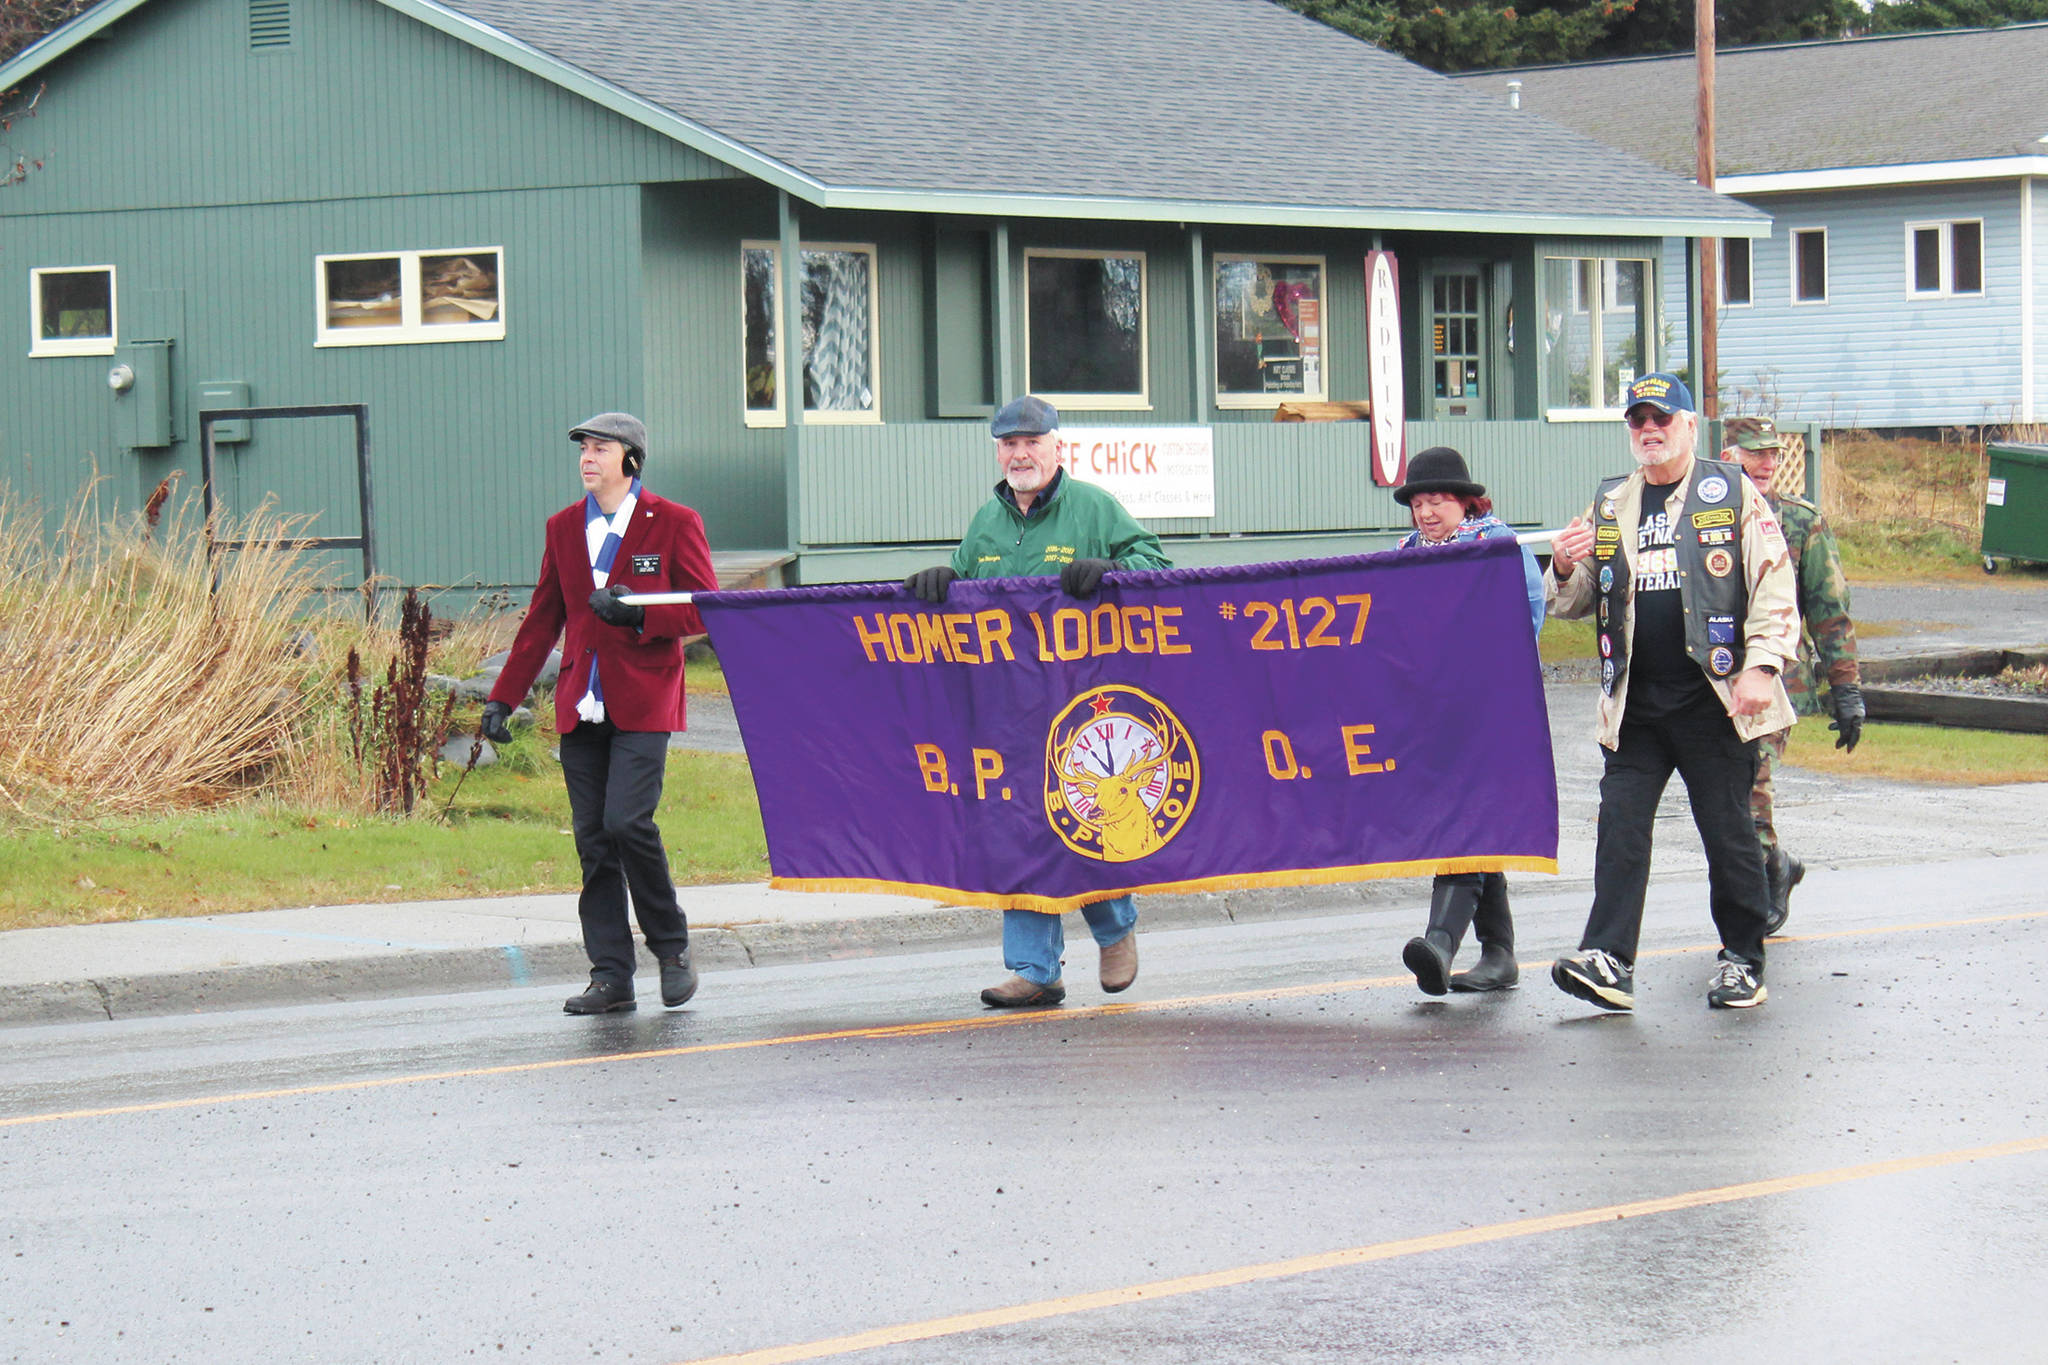 Members of the Homer Elks Lodge participate in this year’s Veterans Day parade and celebration, marching down Pioneer Avenue on Tuesday, Nov. 11, 2020 in Homer, Alaska. (Photo by Megan Pacer/Homer News)